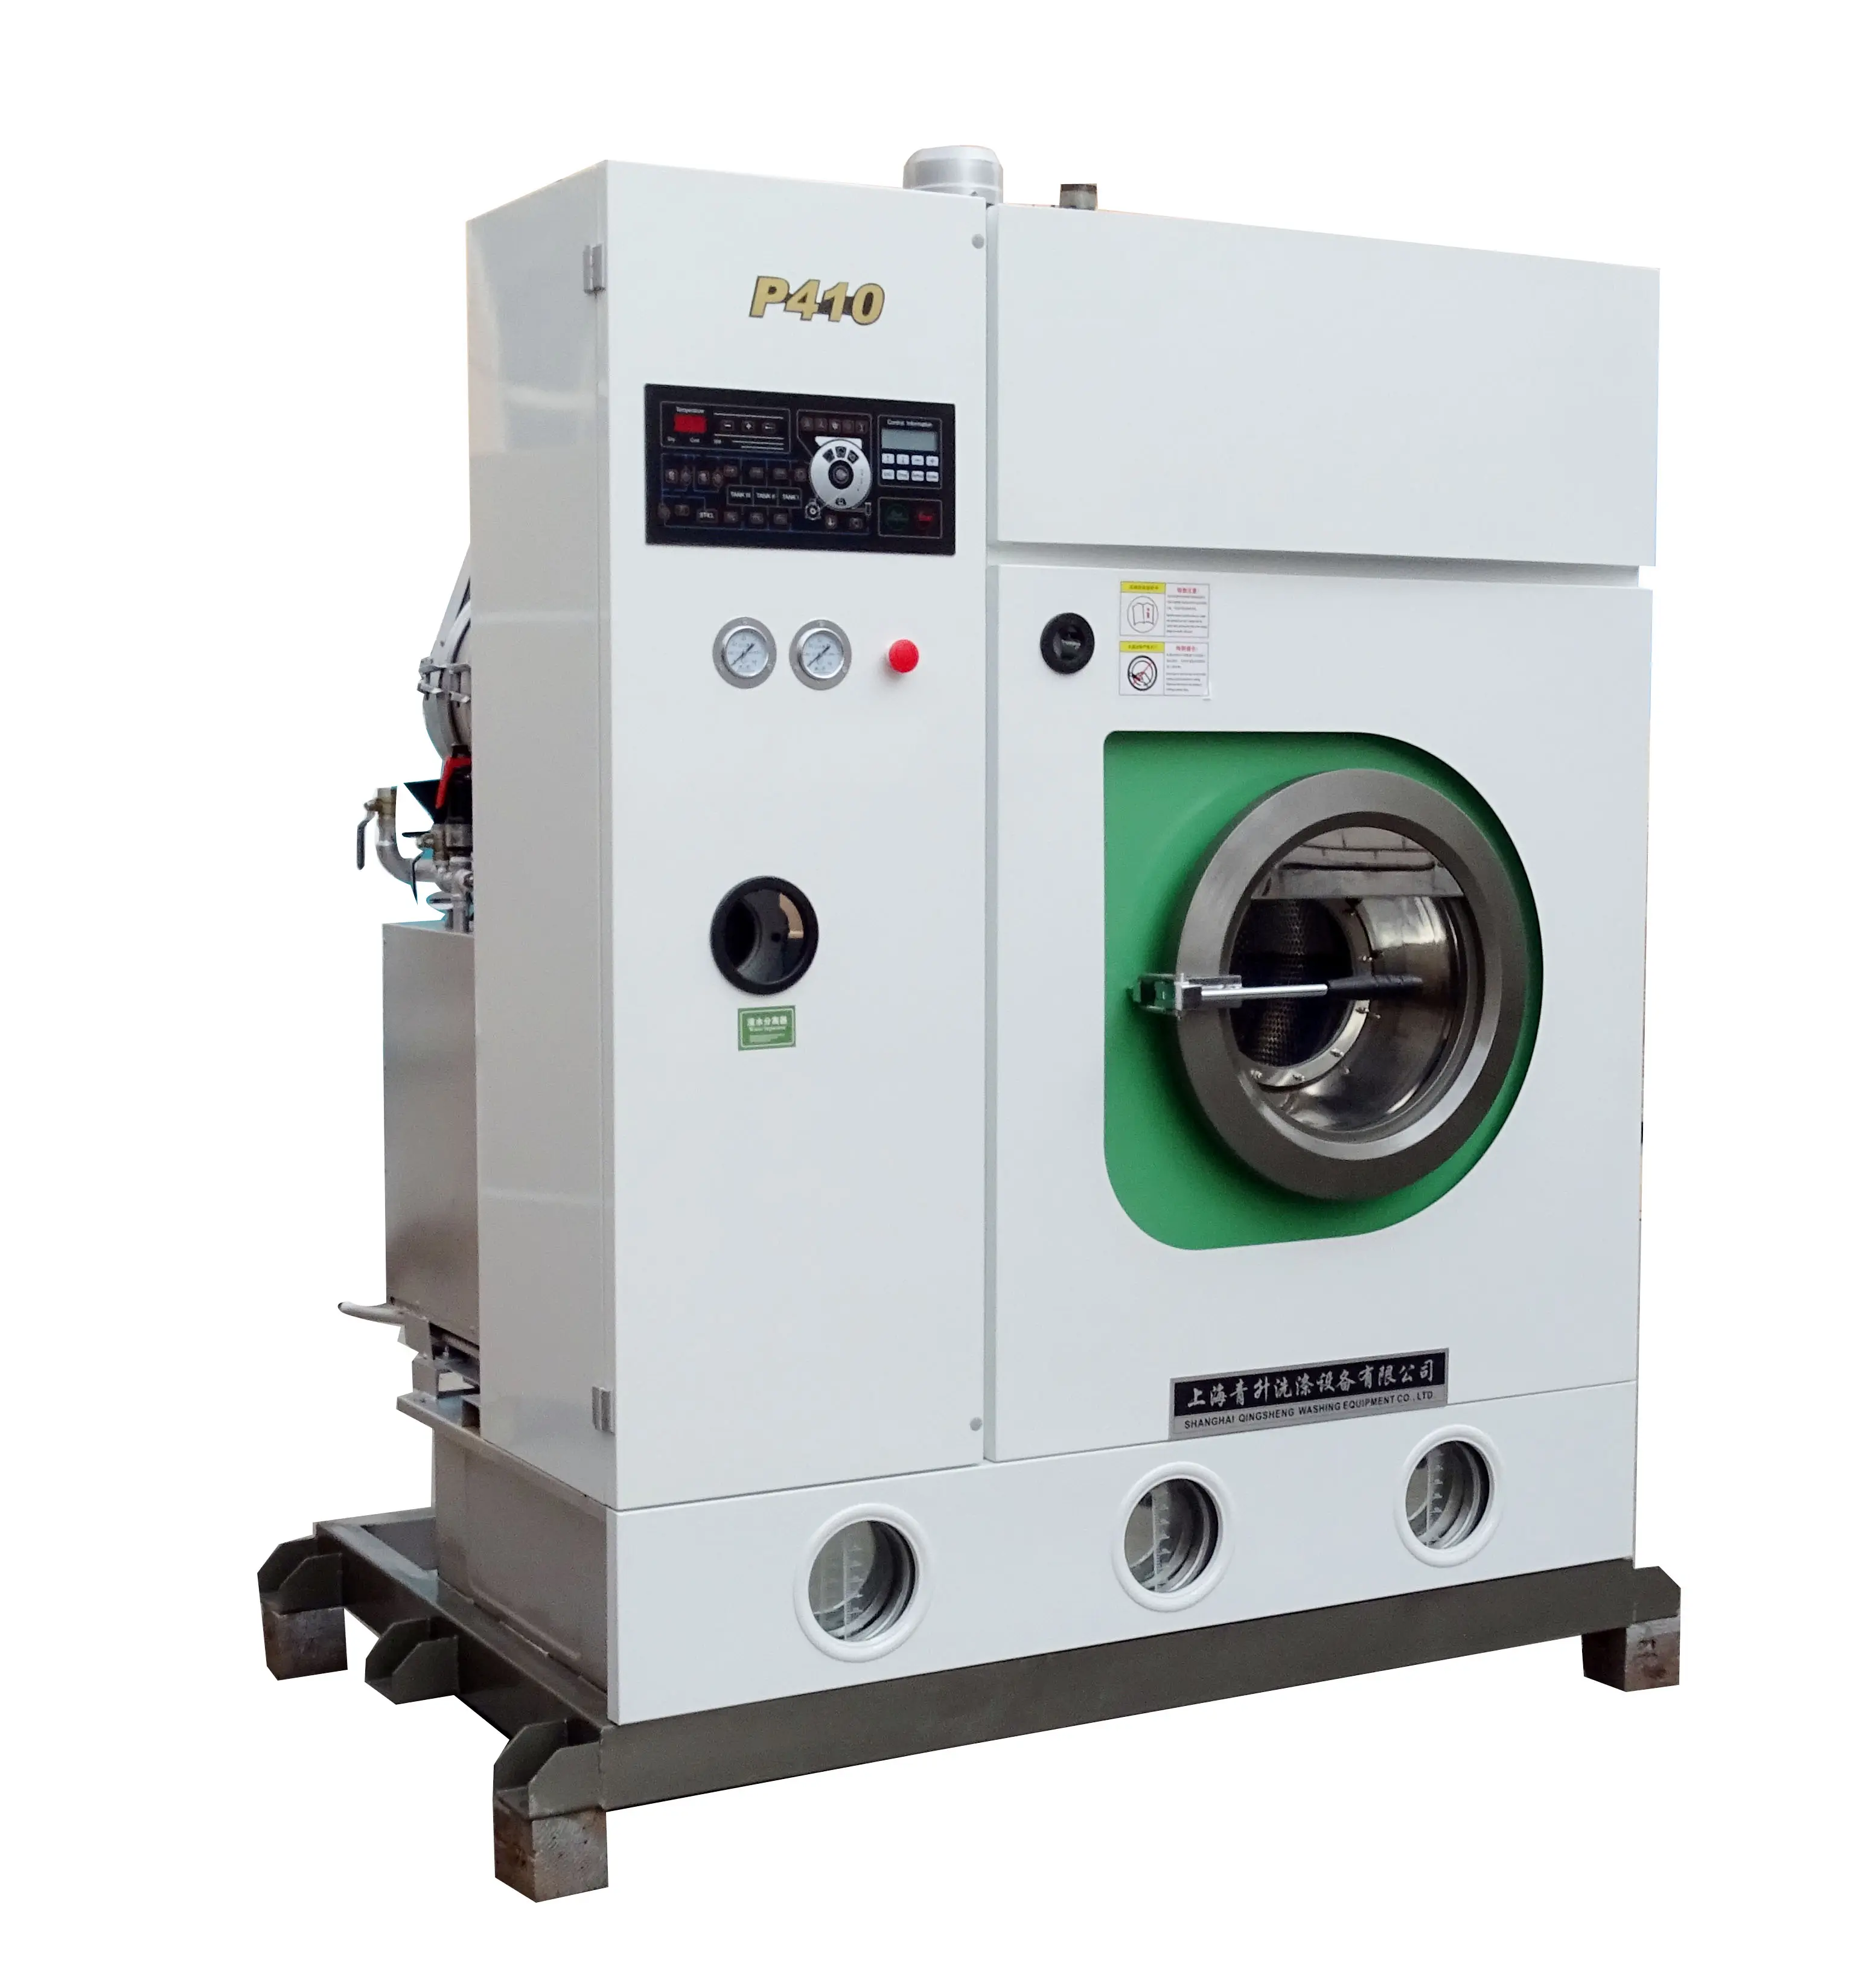 Laundry Machine Price Best Dry Cleaning Equipment Commercial Dry Washing Machine For Laundry Shop 8kg Capacity